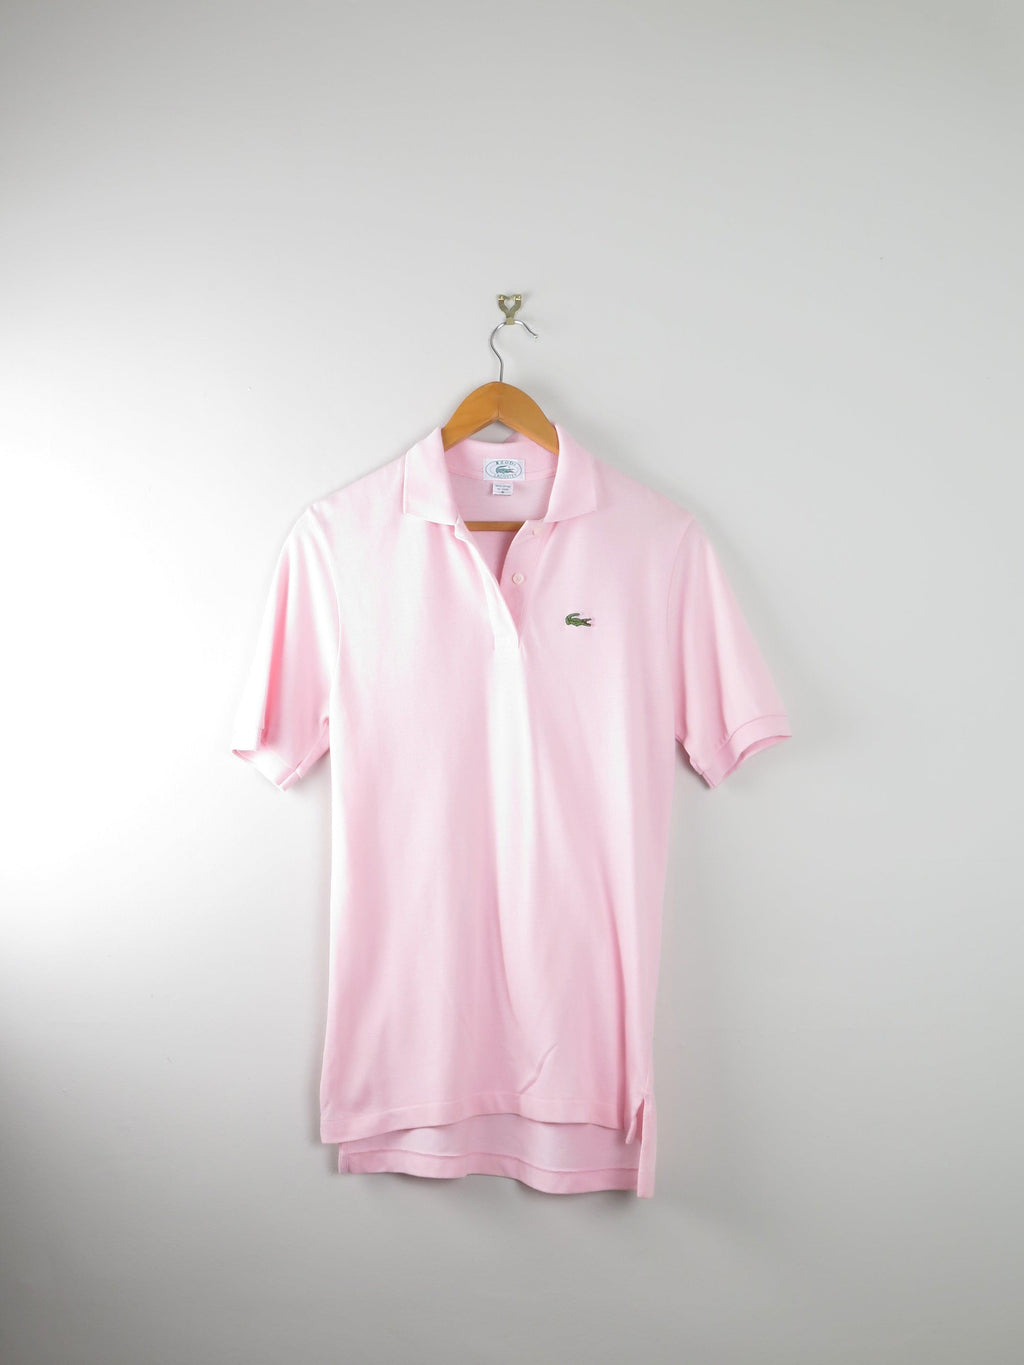 Men's Pink Izod Vintage Lacoste Polo Top S - The Harlequin